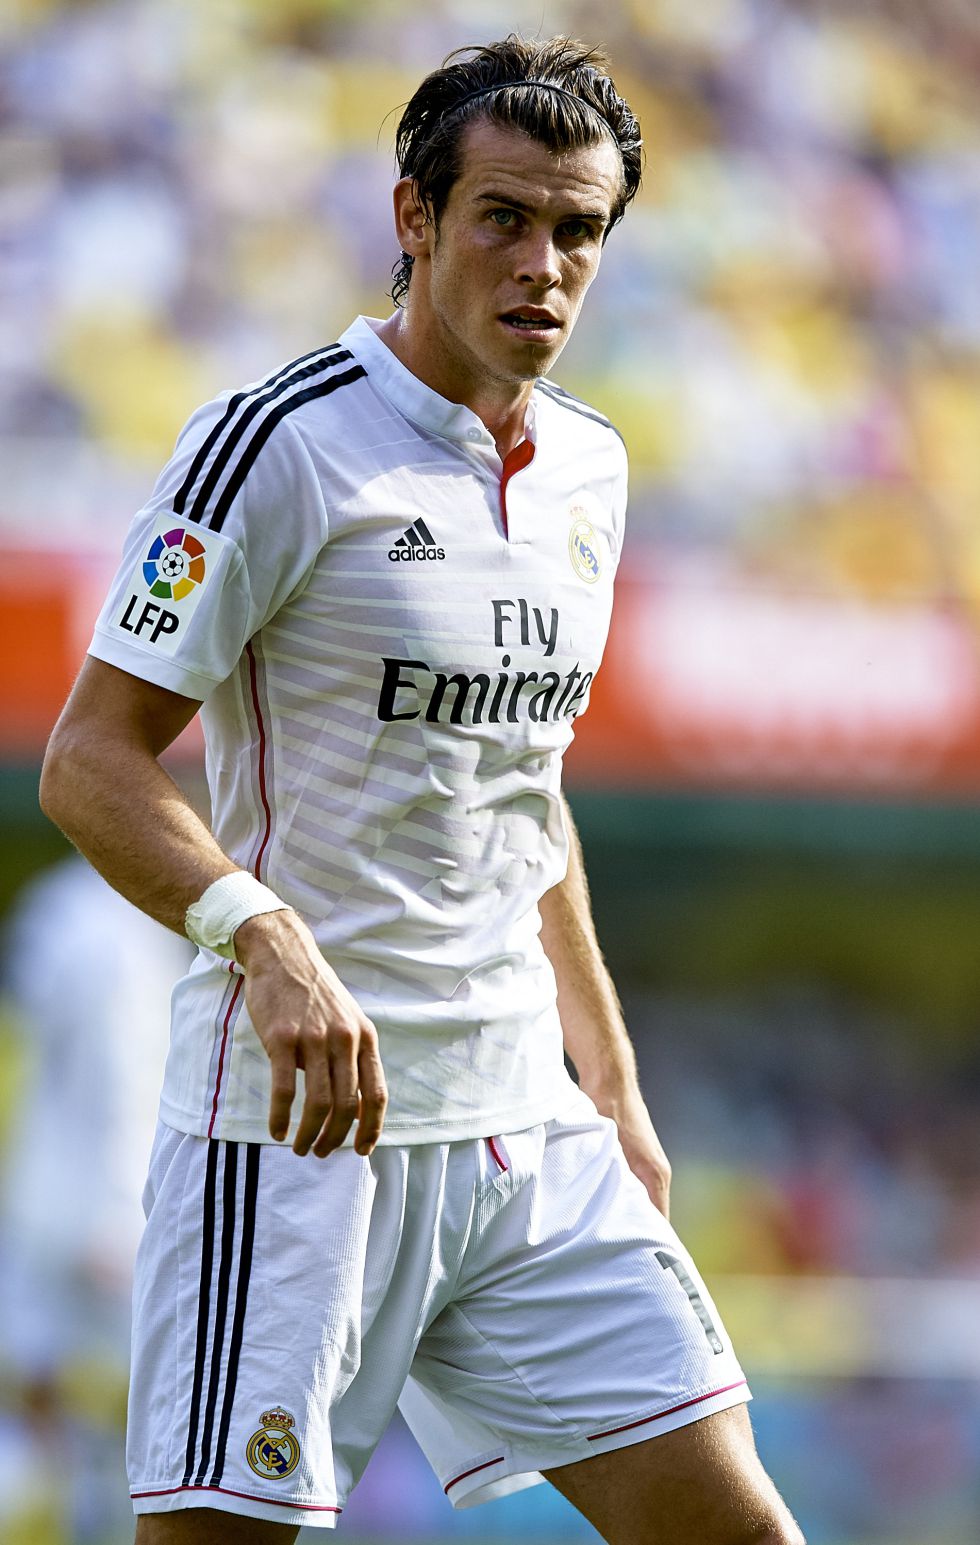 Bale Hairstyle With Headband And Slicked Back Hair